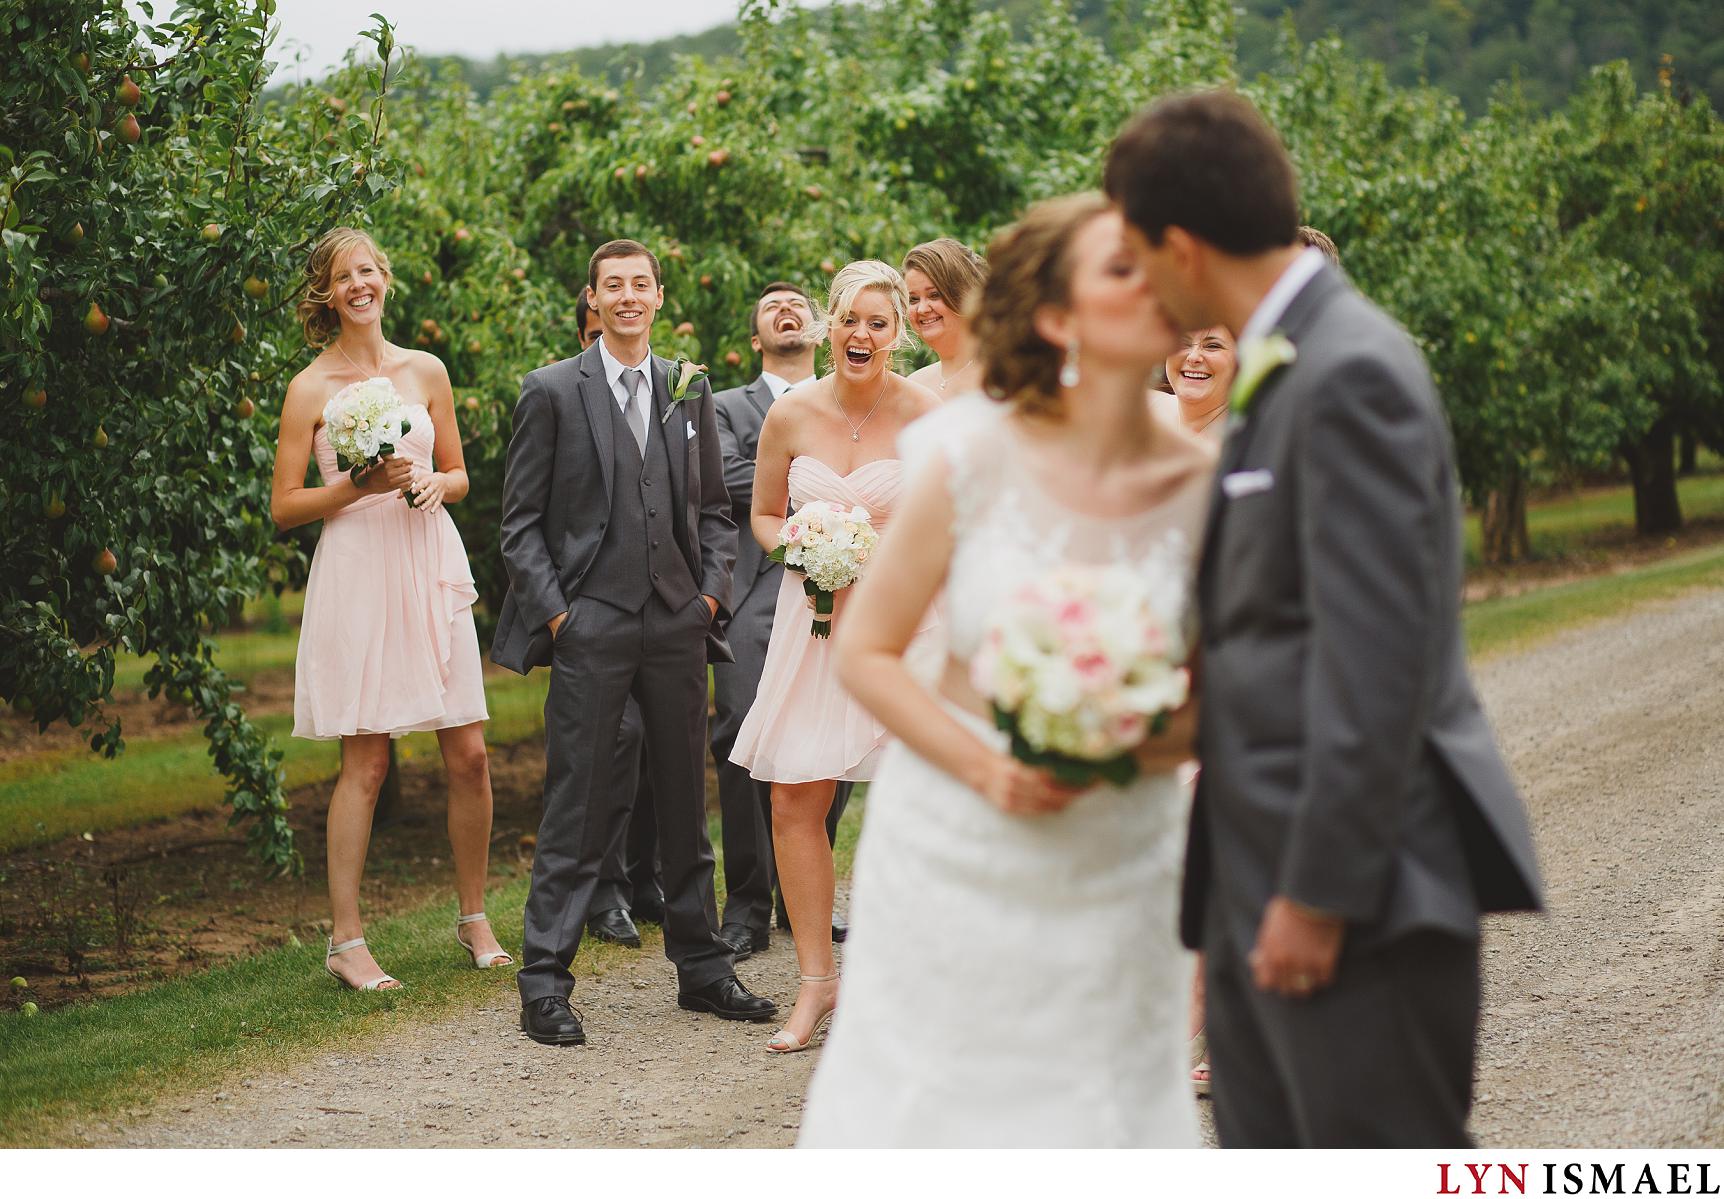 Wedding party reacts to the bride and groom kissing.